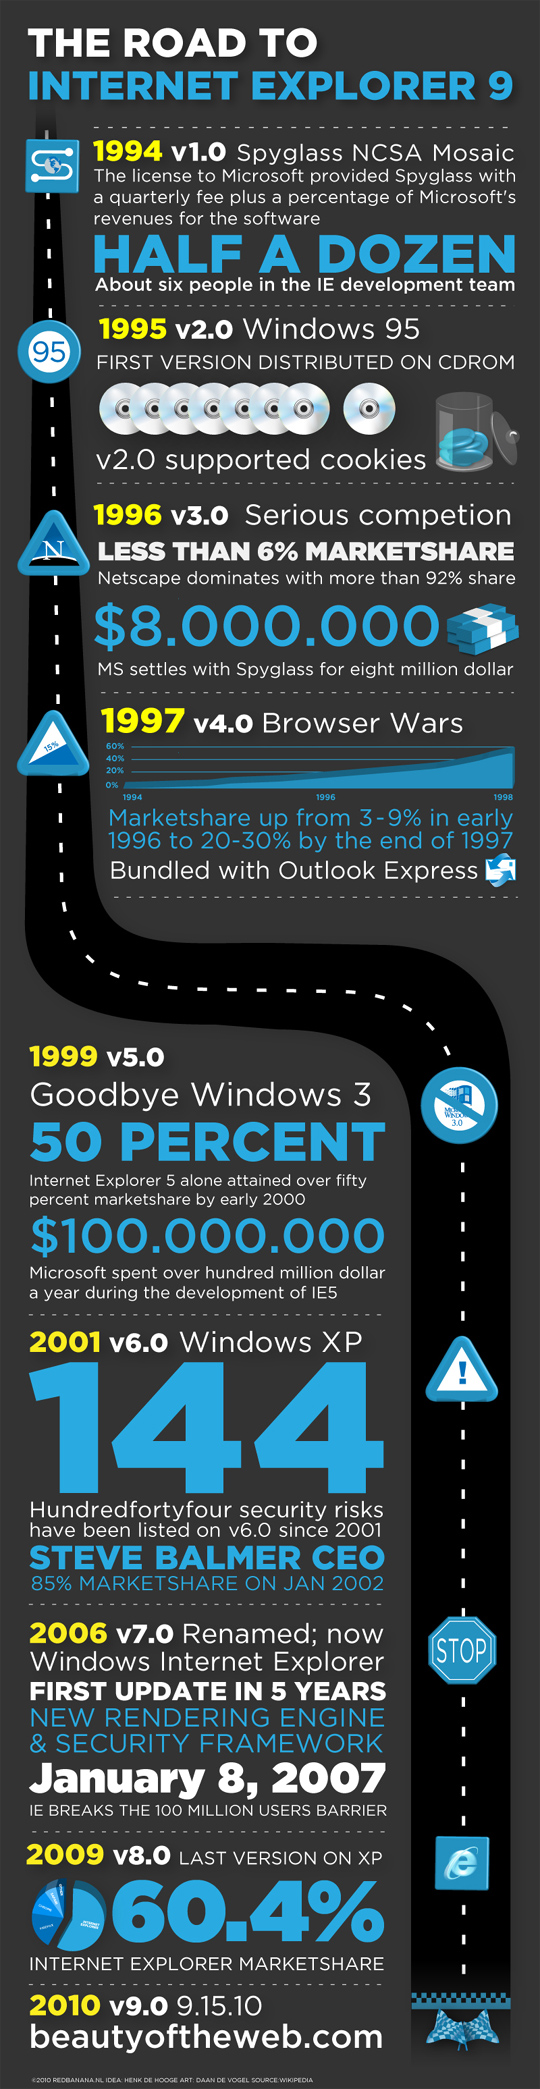 The Road To Internet Explorer 9 (Infographic) 2